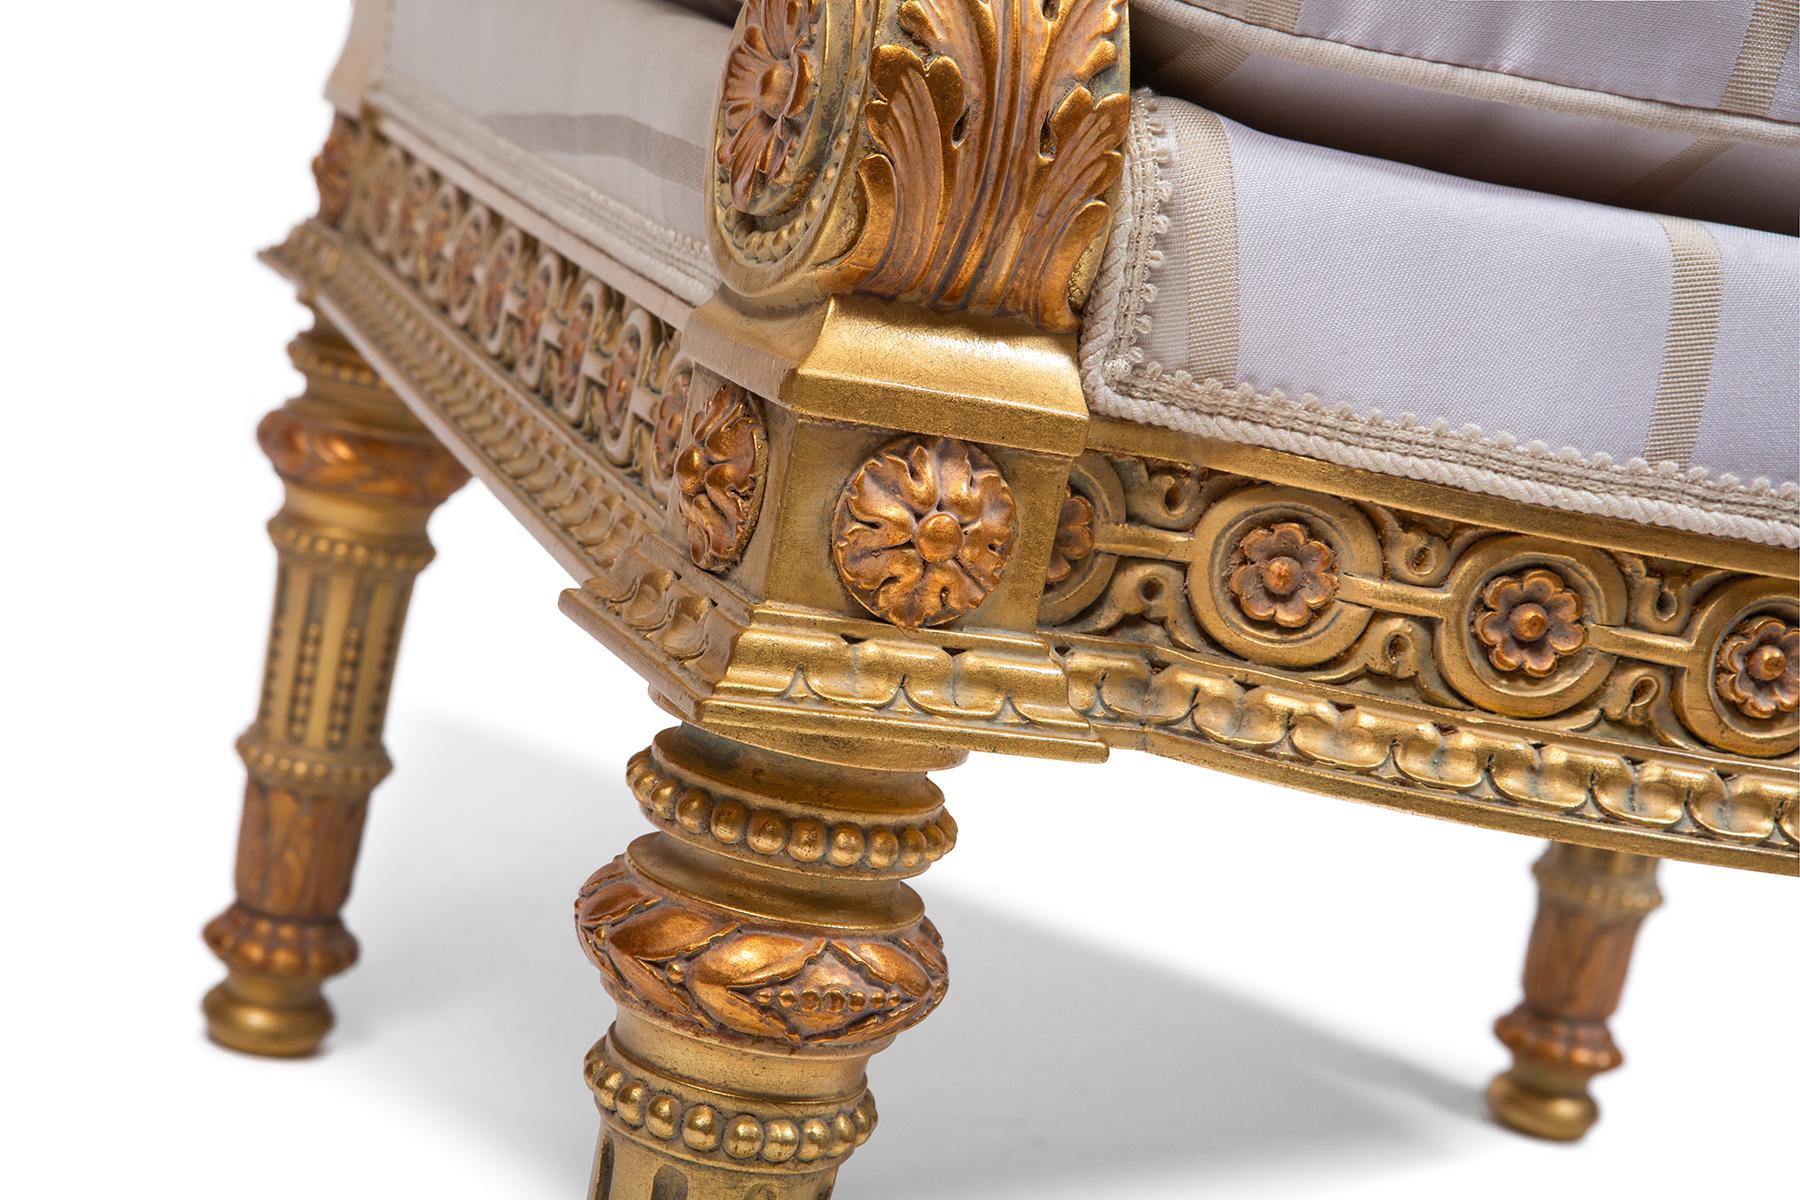 Louis XVI Luis XVI Armchair, Wood Frame Hand Carved, Gold Leaf Finishing, Made in Italy For Sale